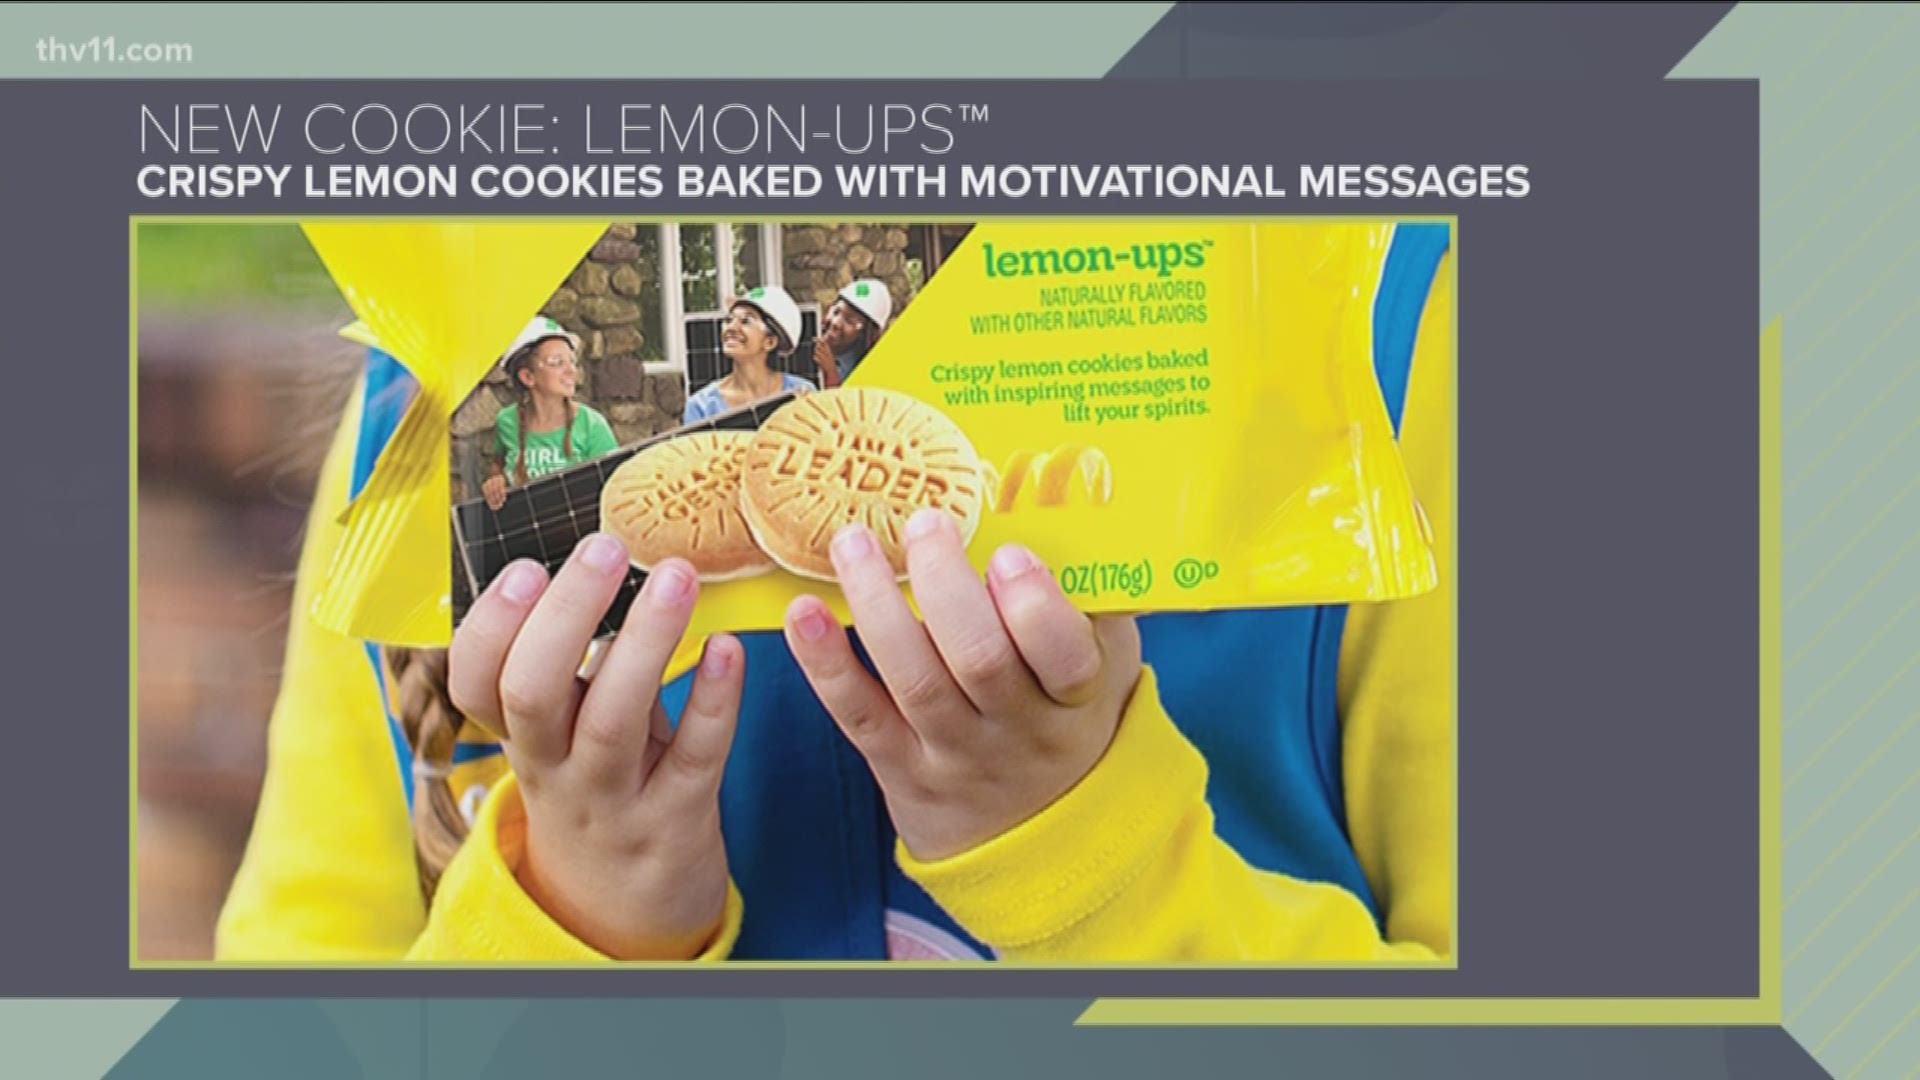 Girl Scouts Diamonds are getting ready to kick off their cookie program on January 10th by announcing their newest cookie, Lemon-Ups.